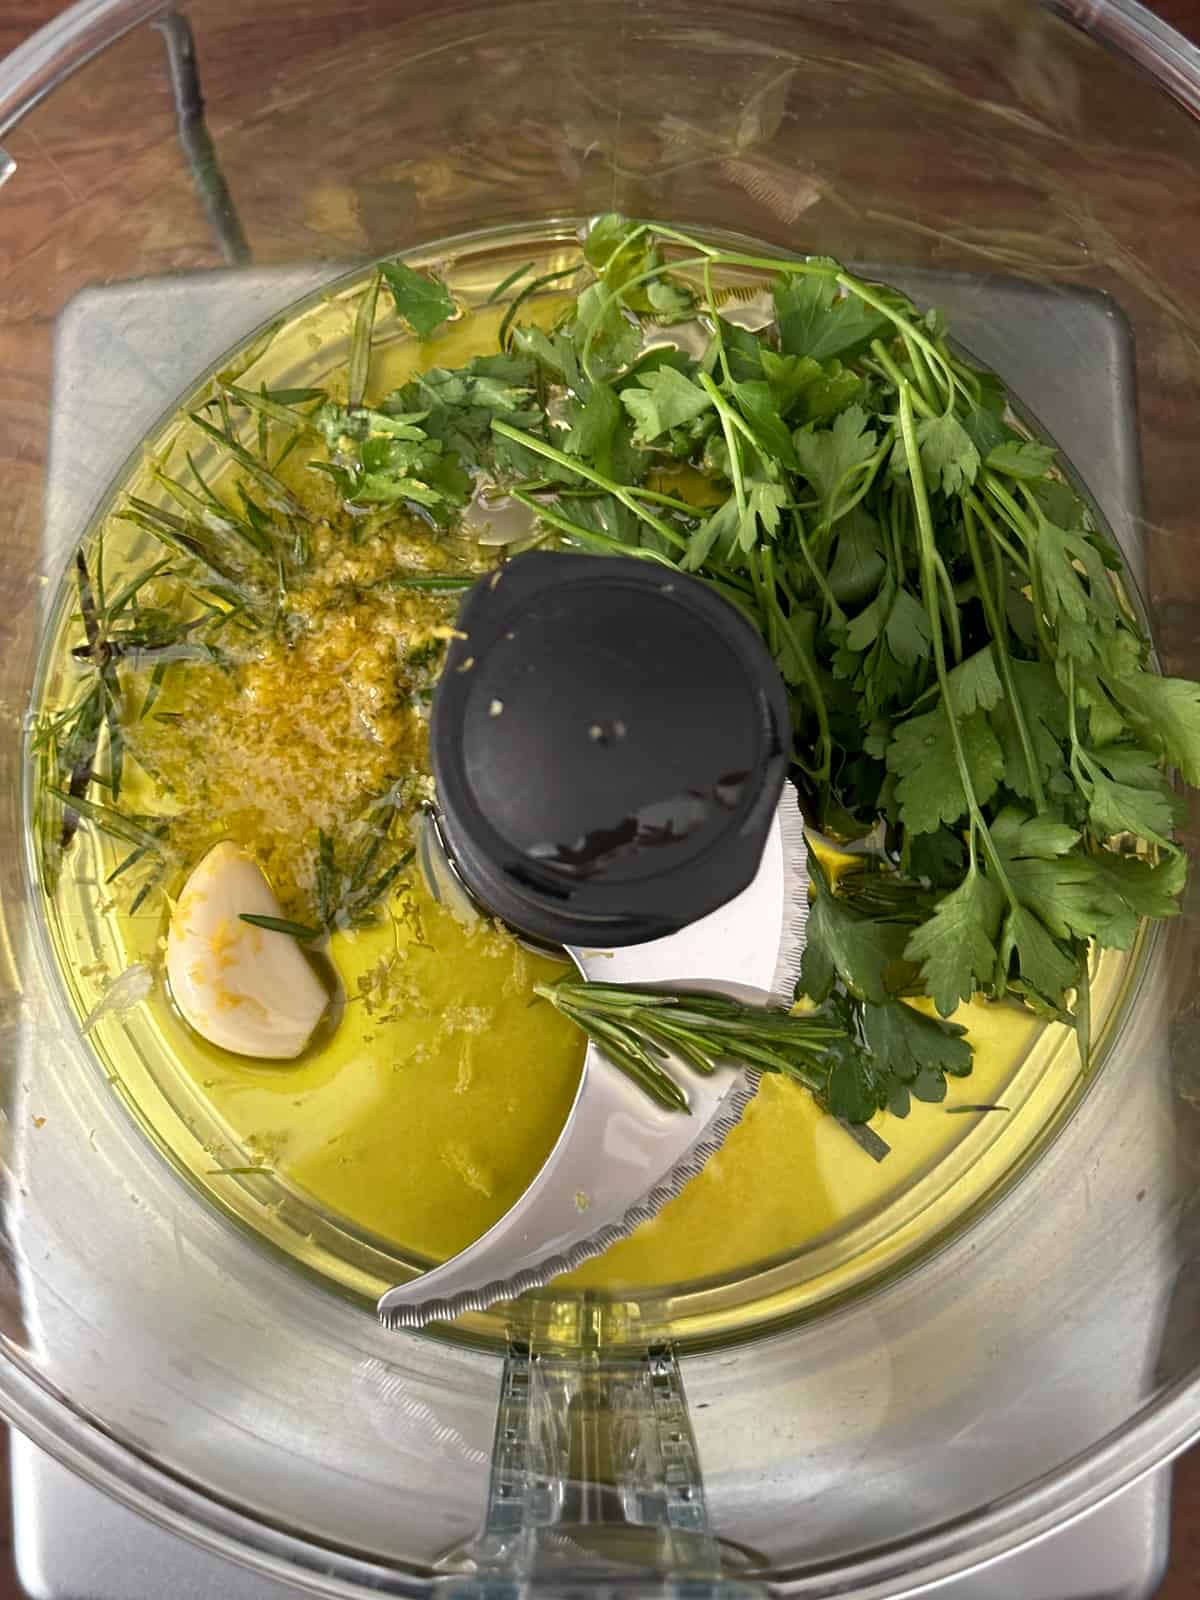  Aclove of garlic, parsley and romesy leaves, mustard and olive oil in  a food processor bowl.